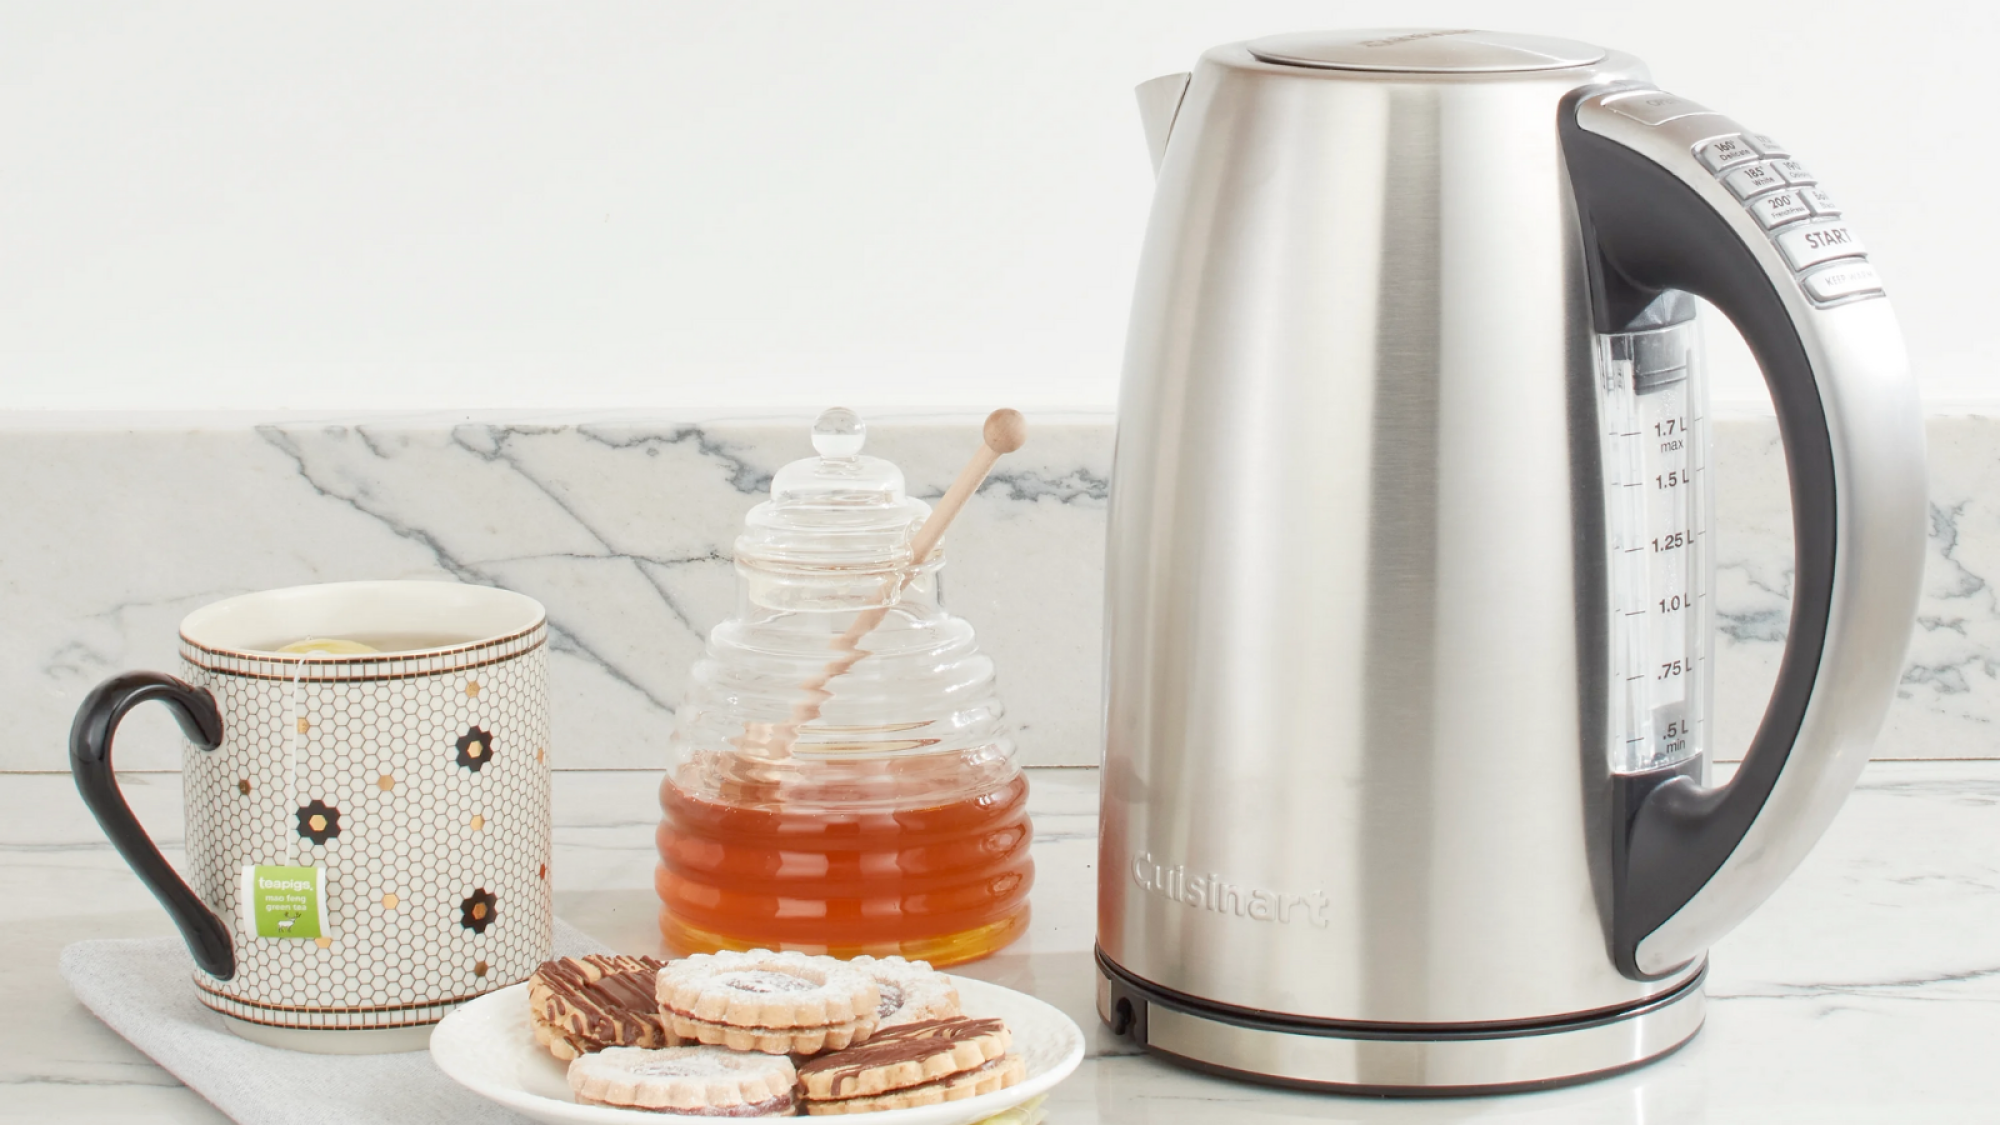 The Cuisinart PerfectTemp Cordless Electric Kettle.